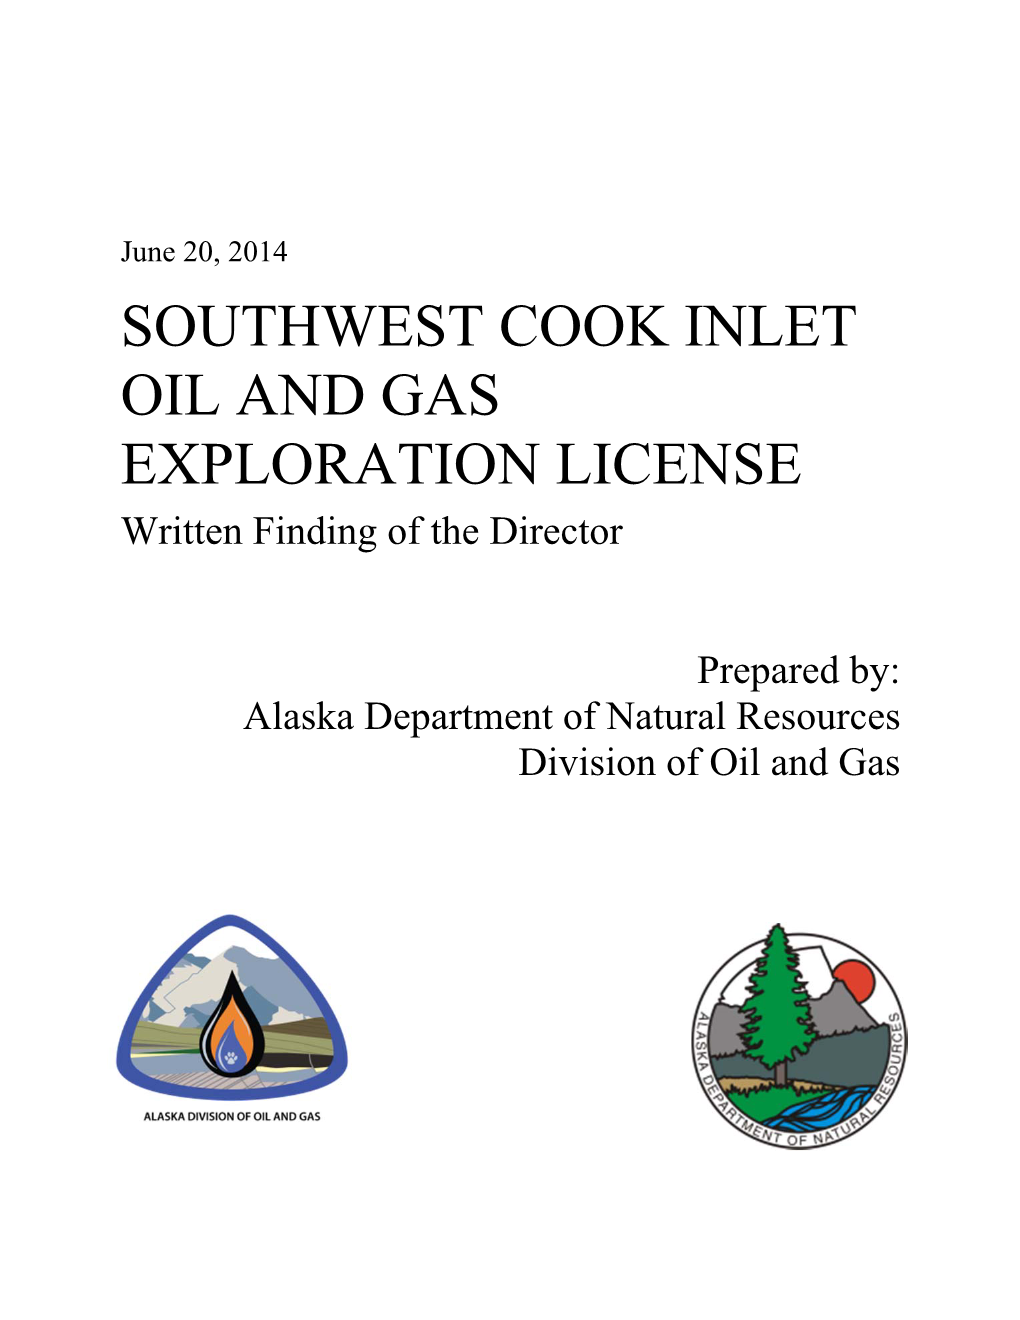 SOUTHWEST COOK INLET OIL and GAS EXPLORATION LICENSE Written Finding of the Director